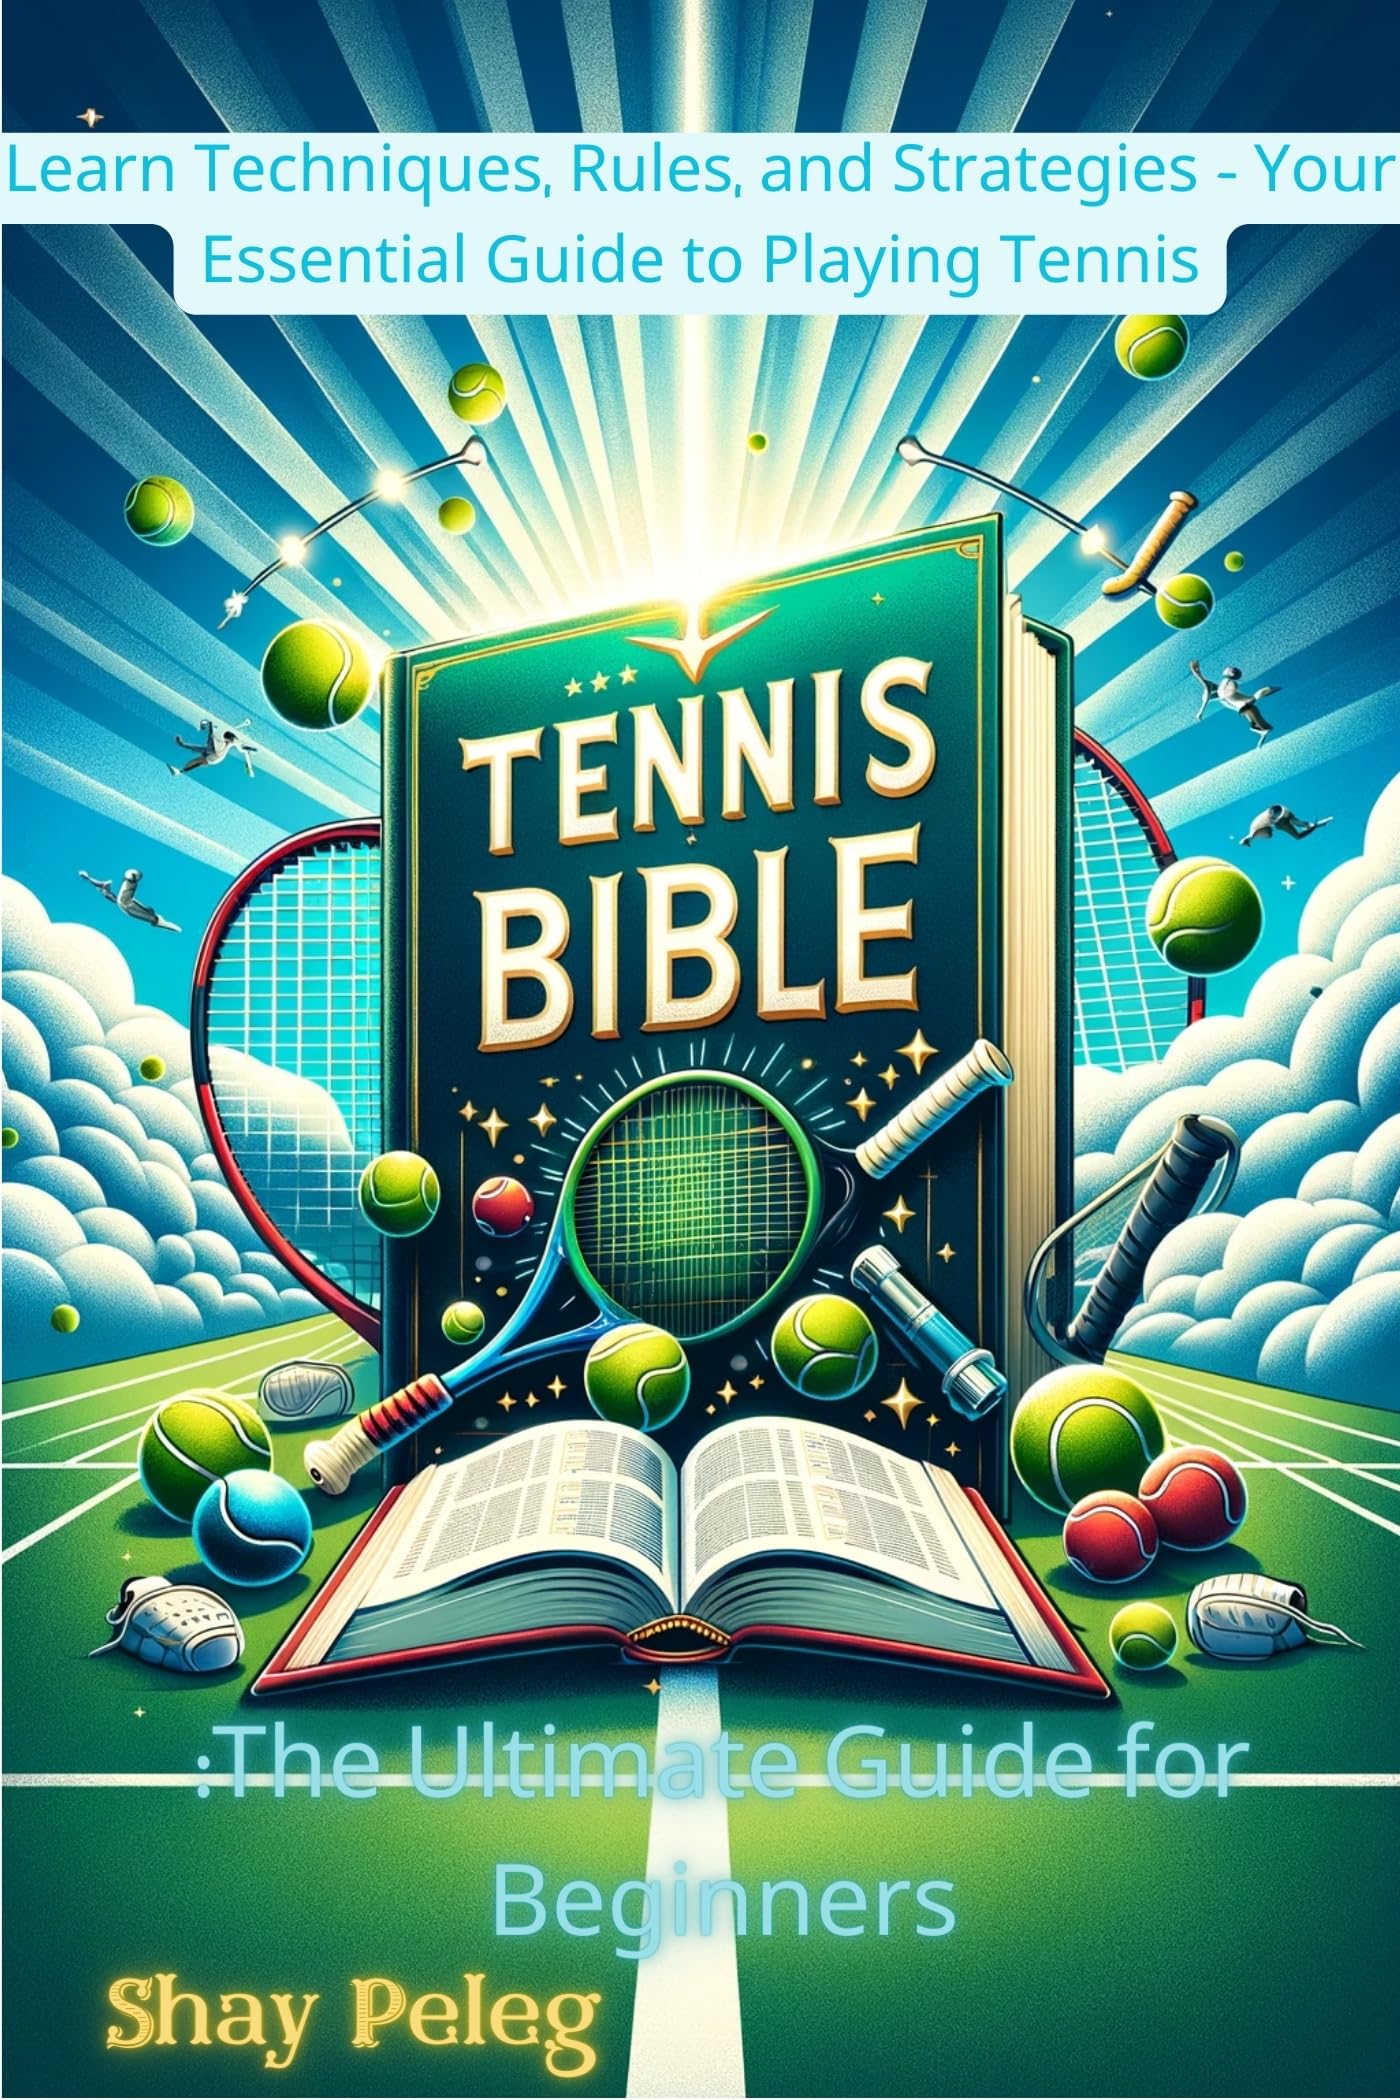 Tennis Bible: The Ultimate Guide for Beginners : Learn Techniques, Rules, and Strategies - Your Essential Guide to Playing Tennis (Tennis Court Mastery Series Book 1)